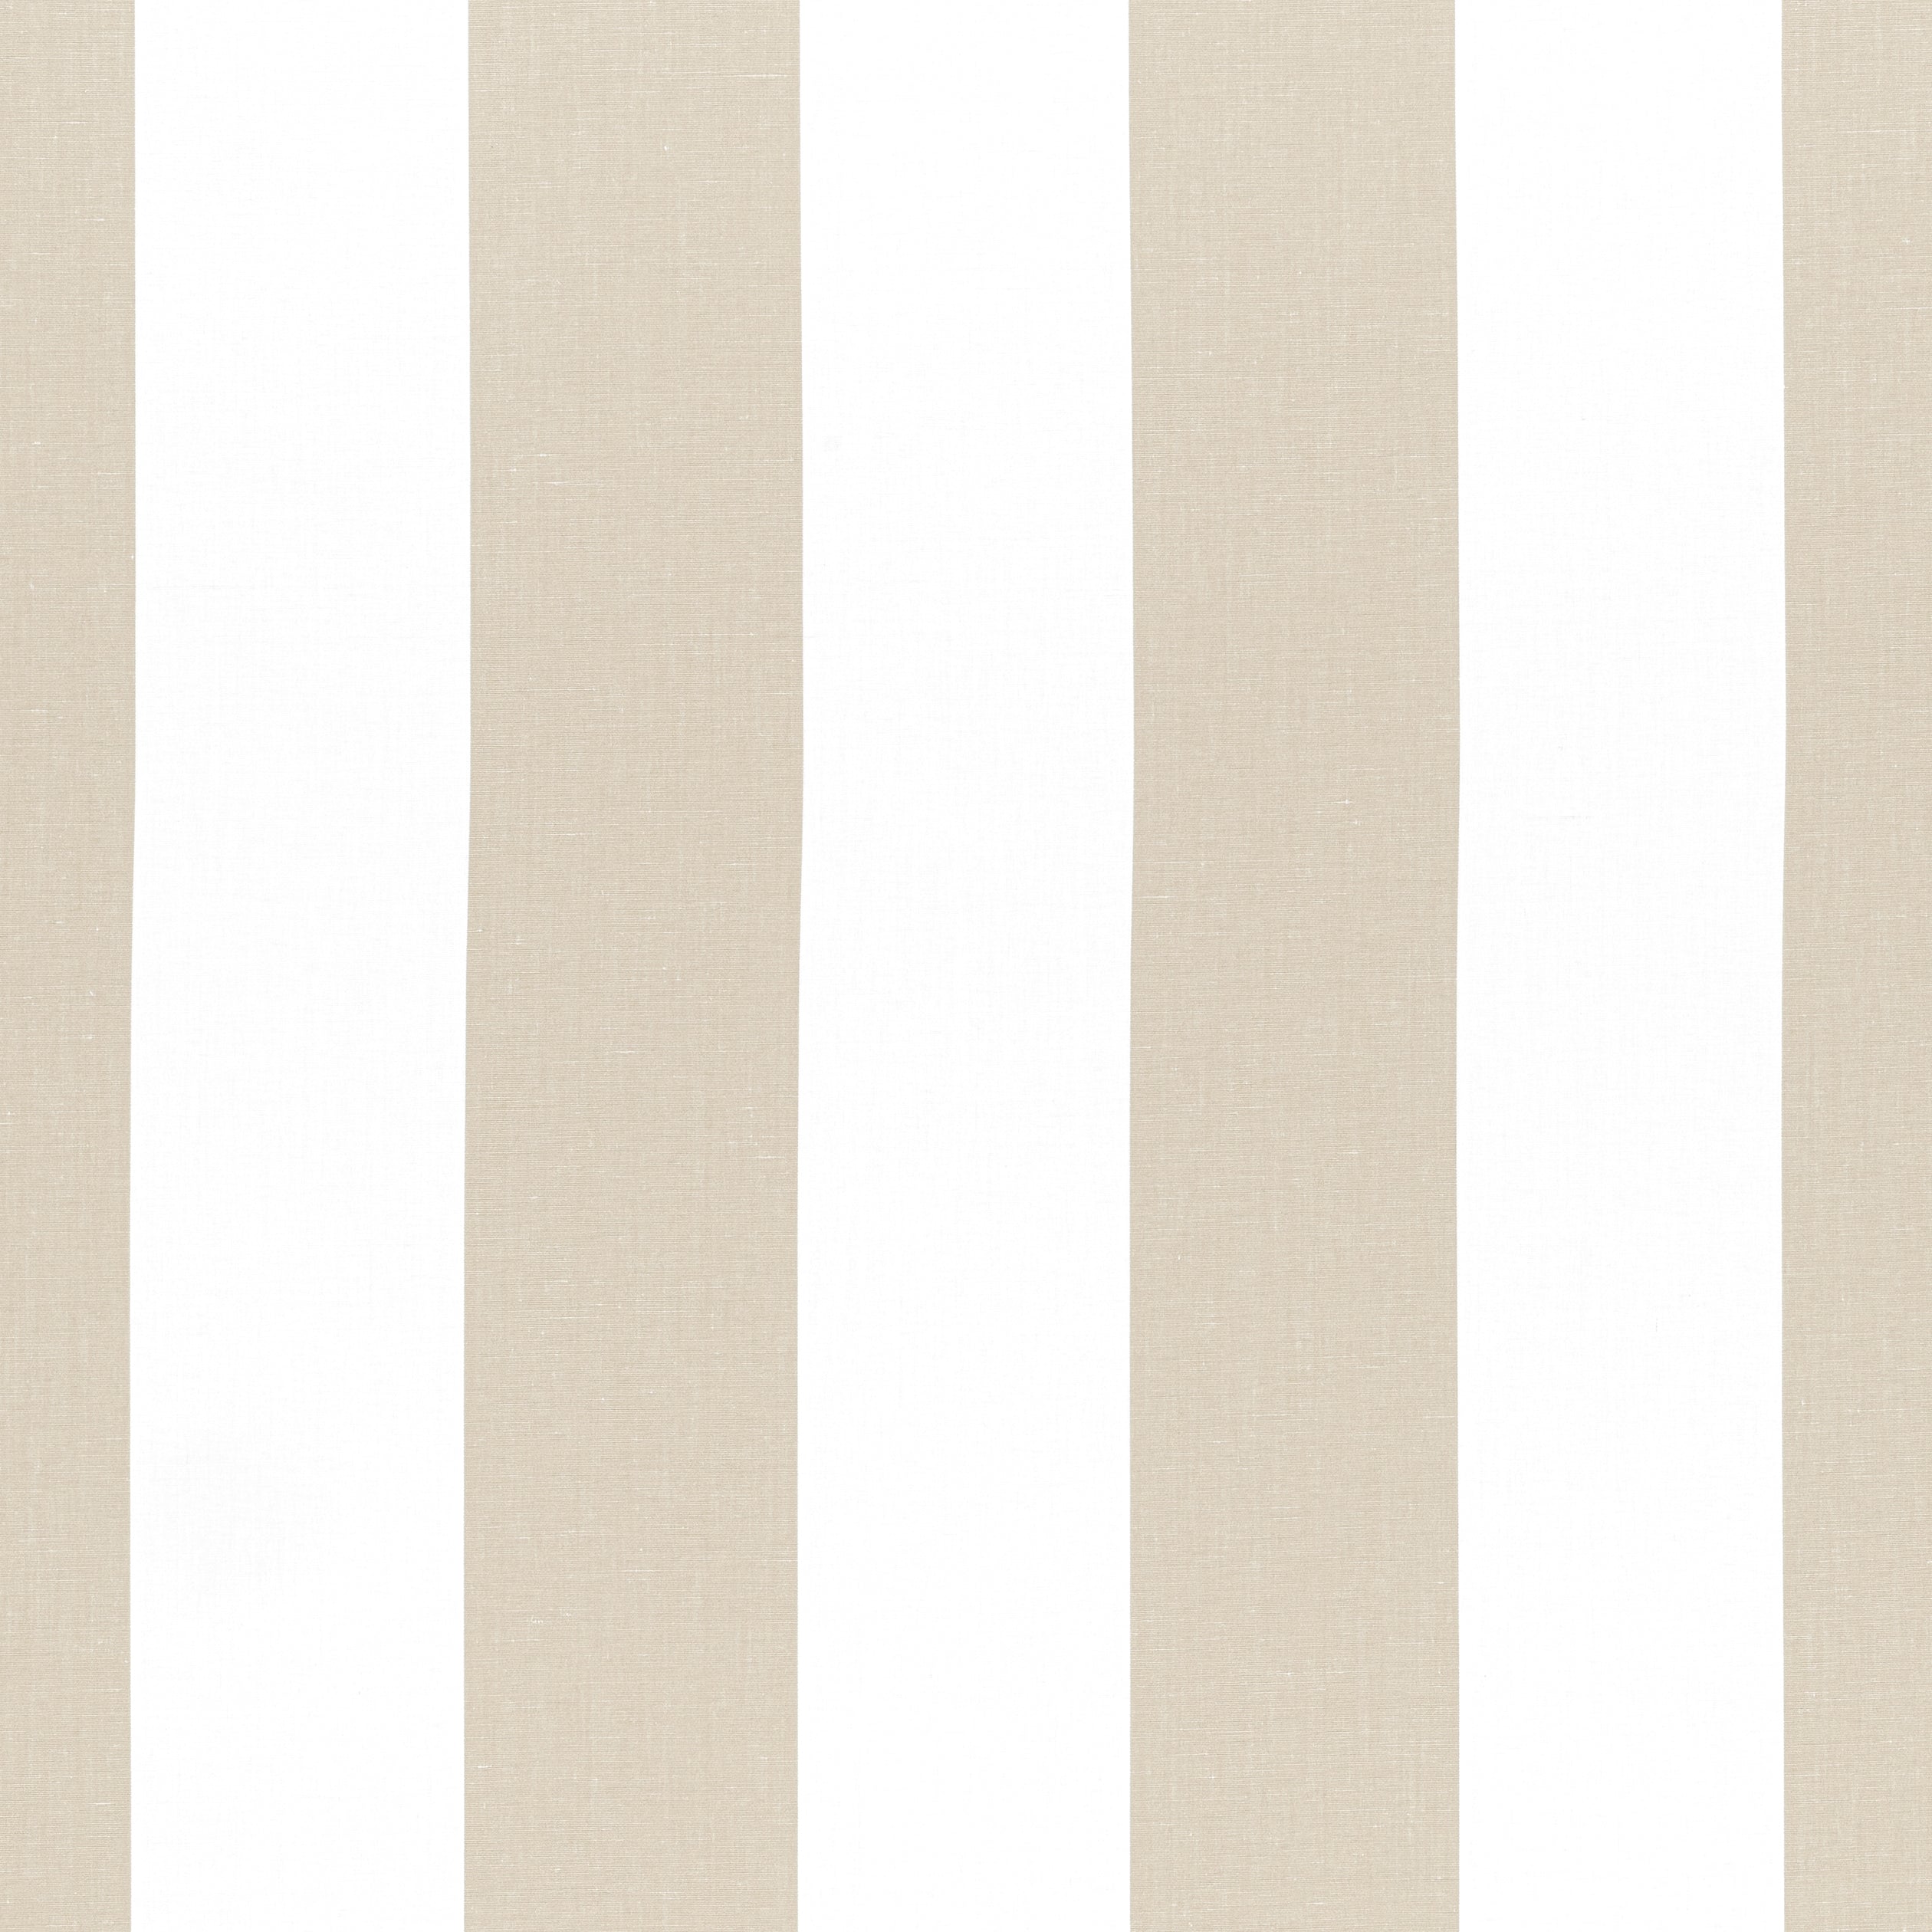 Bergamo Stripe fabric in taupe color - pattern number W713640 - by Thibaut in the Grand Palace collection